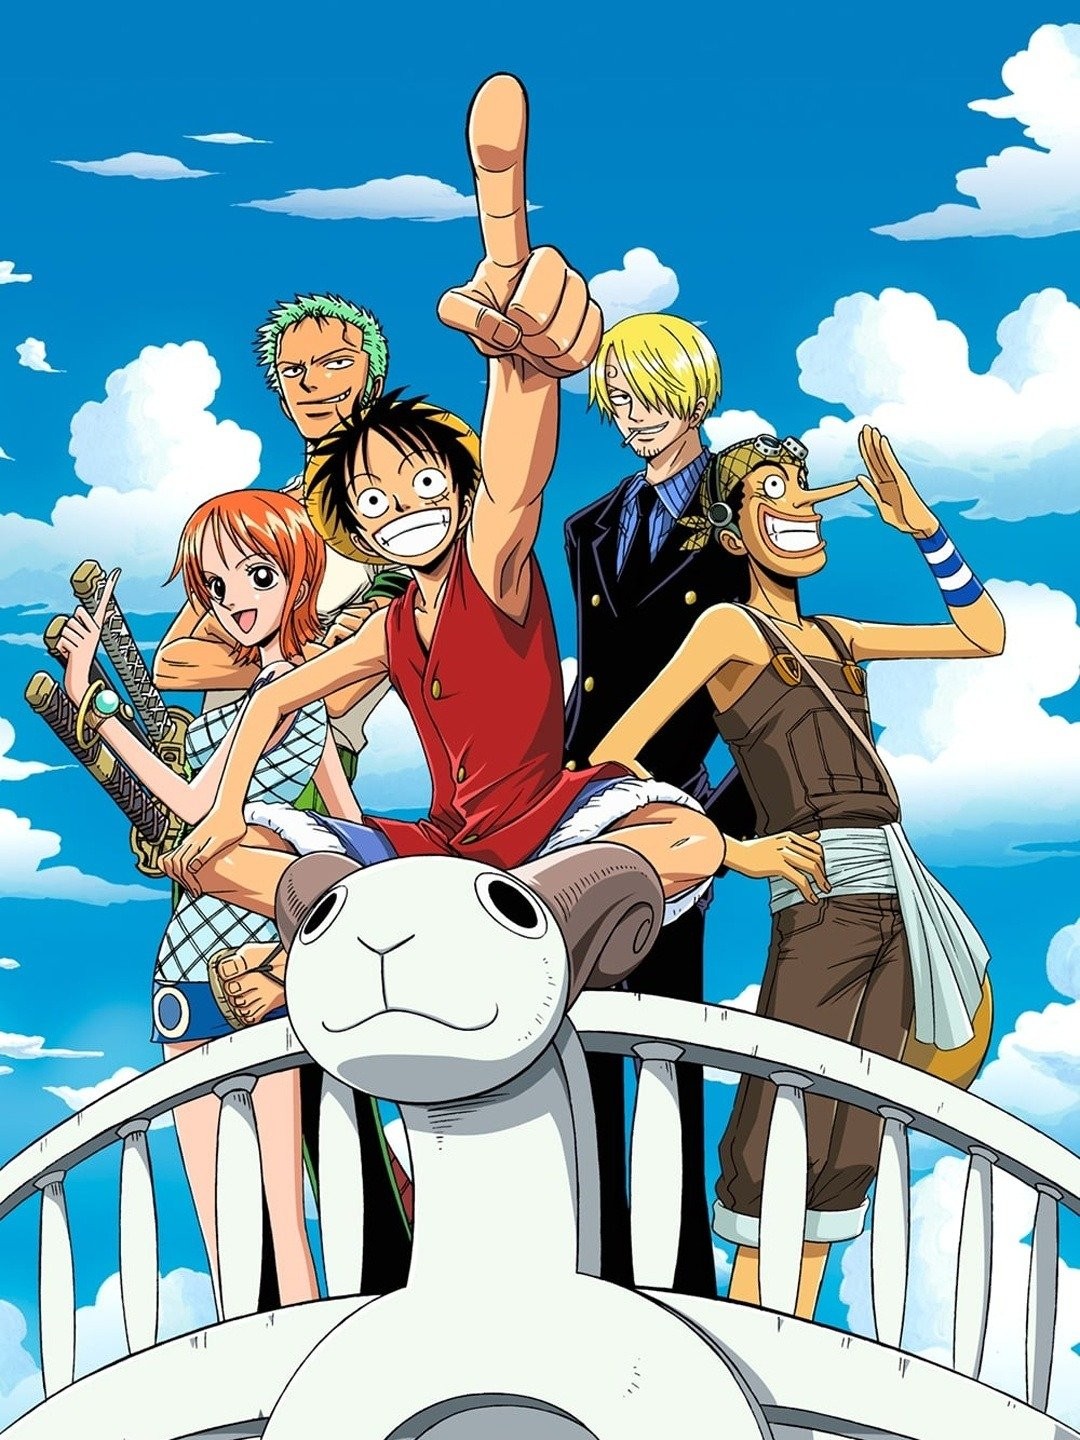 One Piece Film Z - One Piece Wiki - One Piece Film Z Images, Pictures,  Photos, Icons and Wallpapers: Ravepad - the place to rave about anything  and everything!